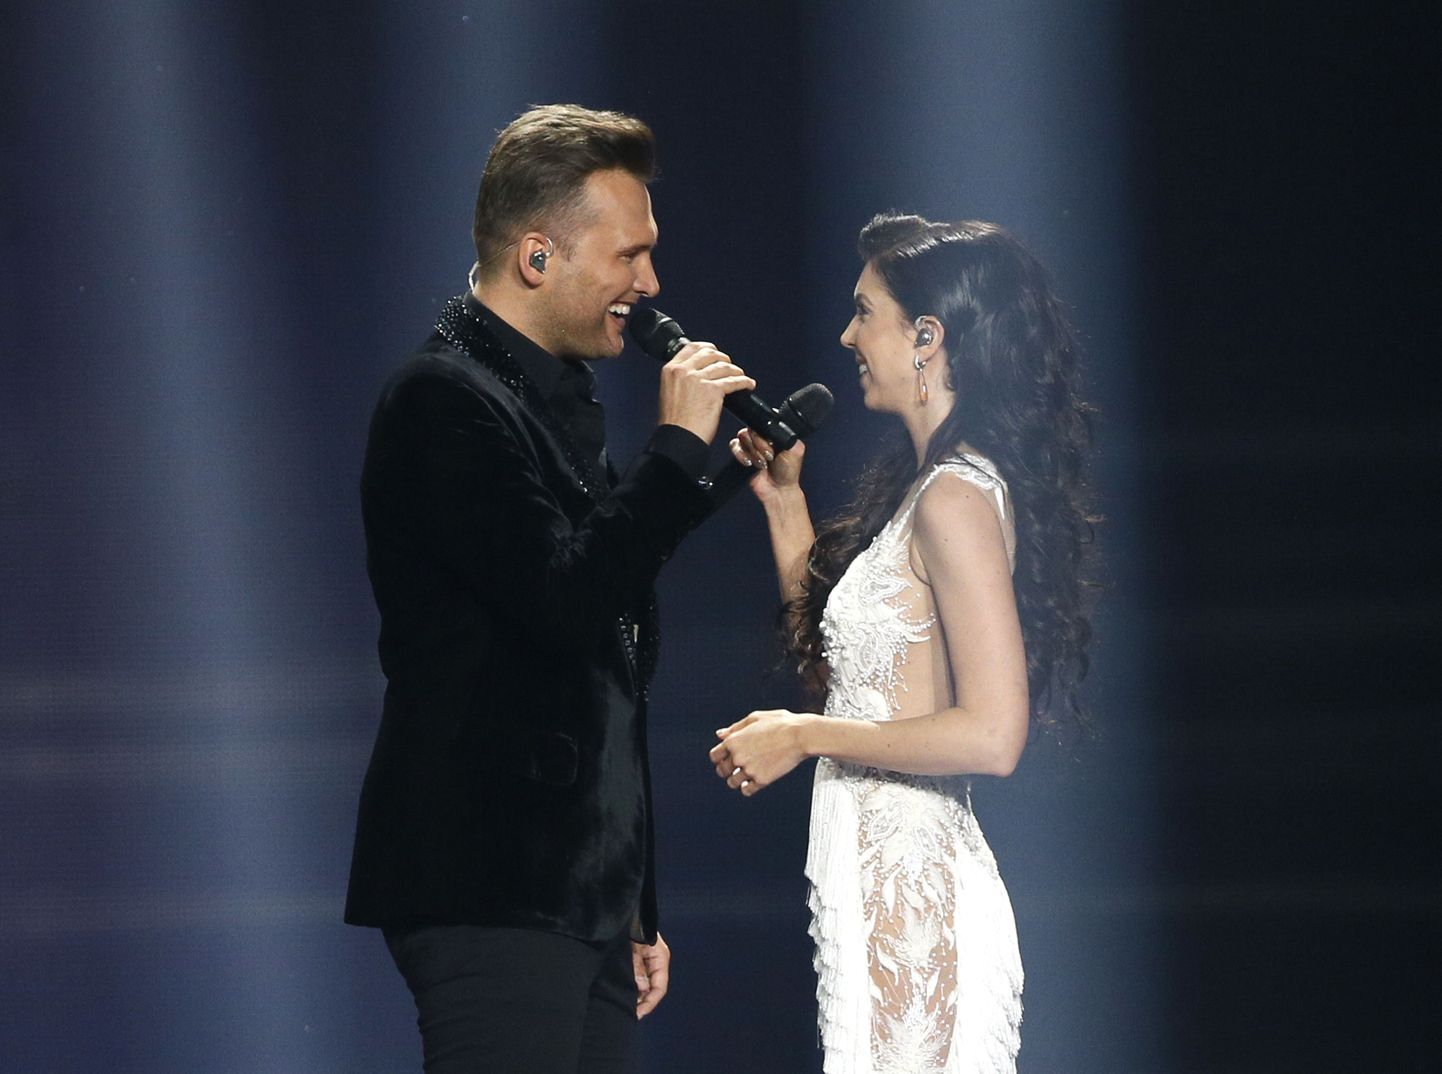 Estonia's Koit Toome & Laura perform the song "Verona" during the Eurovision Song Contest 2017 Semi-Final 2 at the International Exhibition Centre in Kiev, Ukraine, May 11, 2017. REUTERS/Gleb Garanich